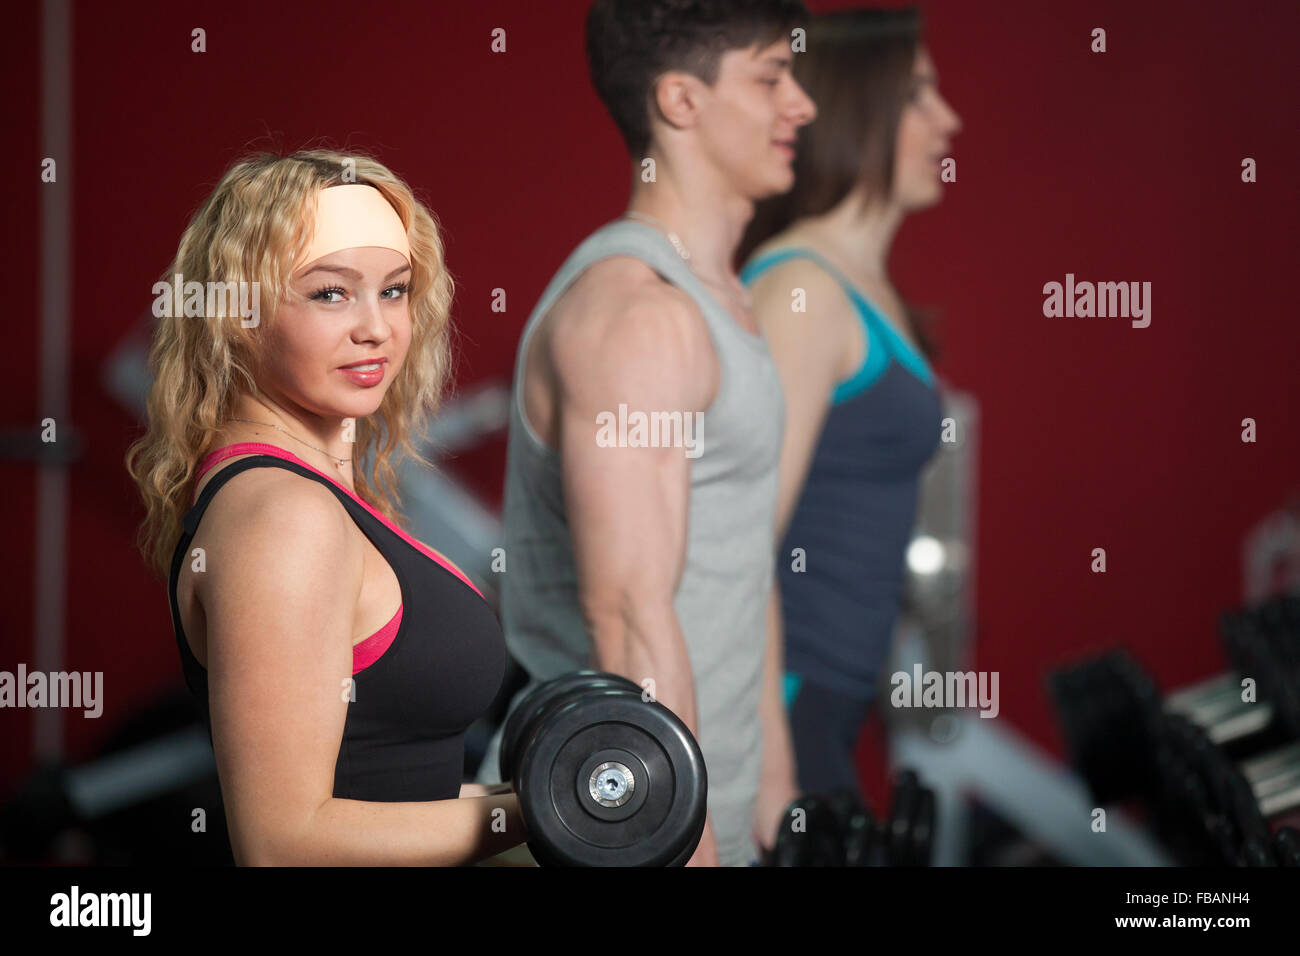 Group of sporty people do bodybuilding exercises with dumbbells in gym Stock Photo